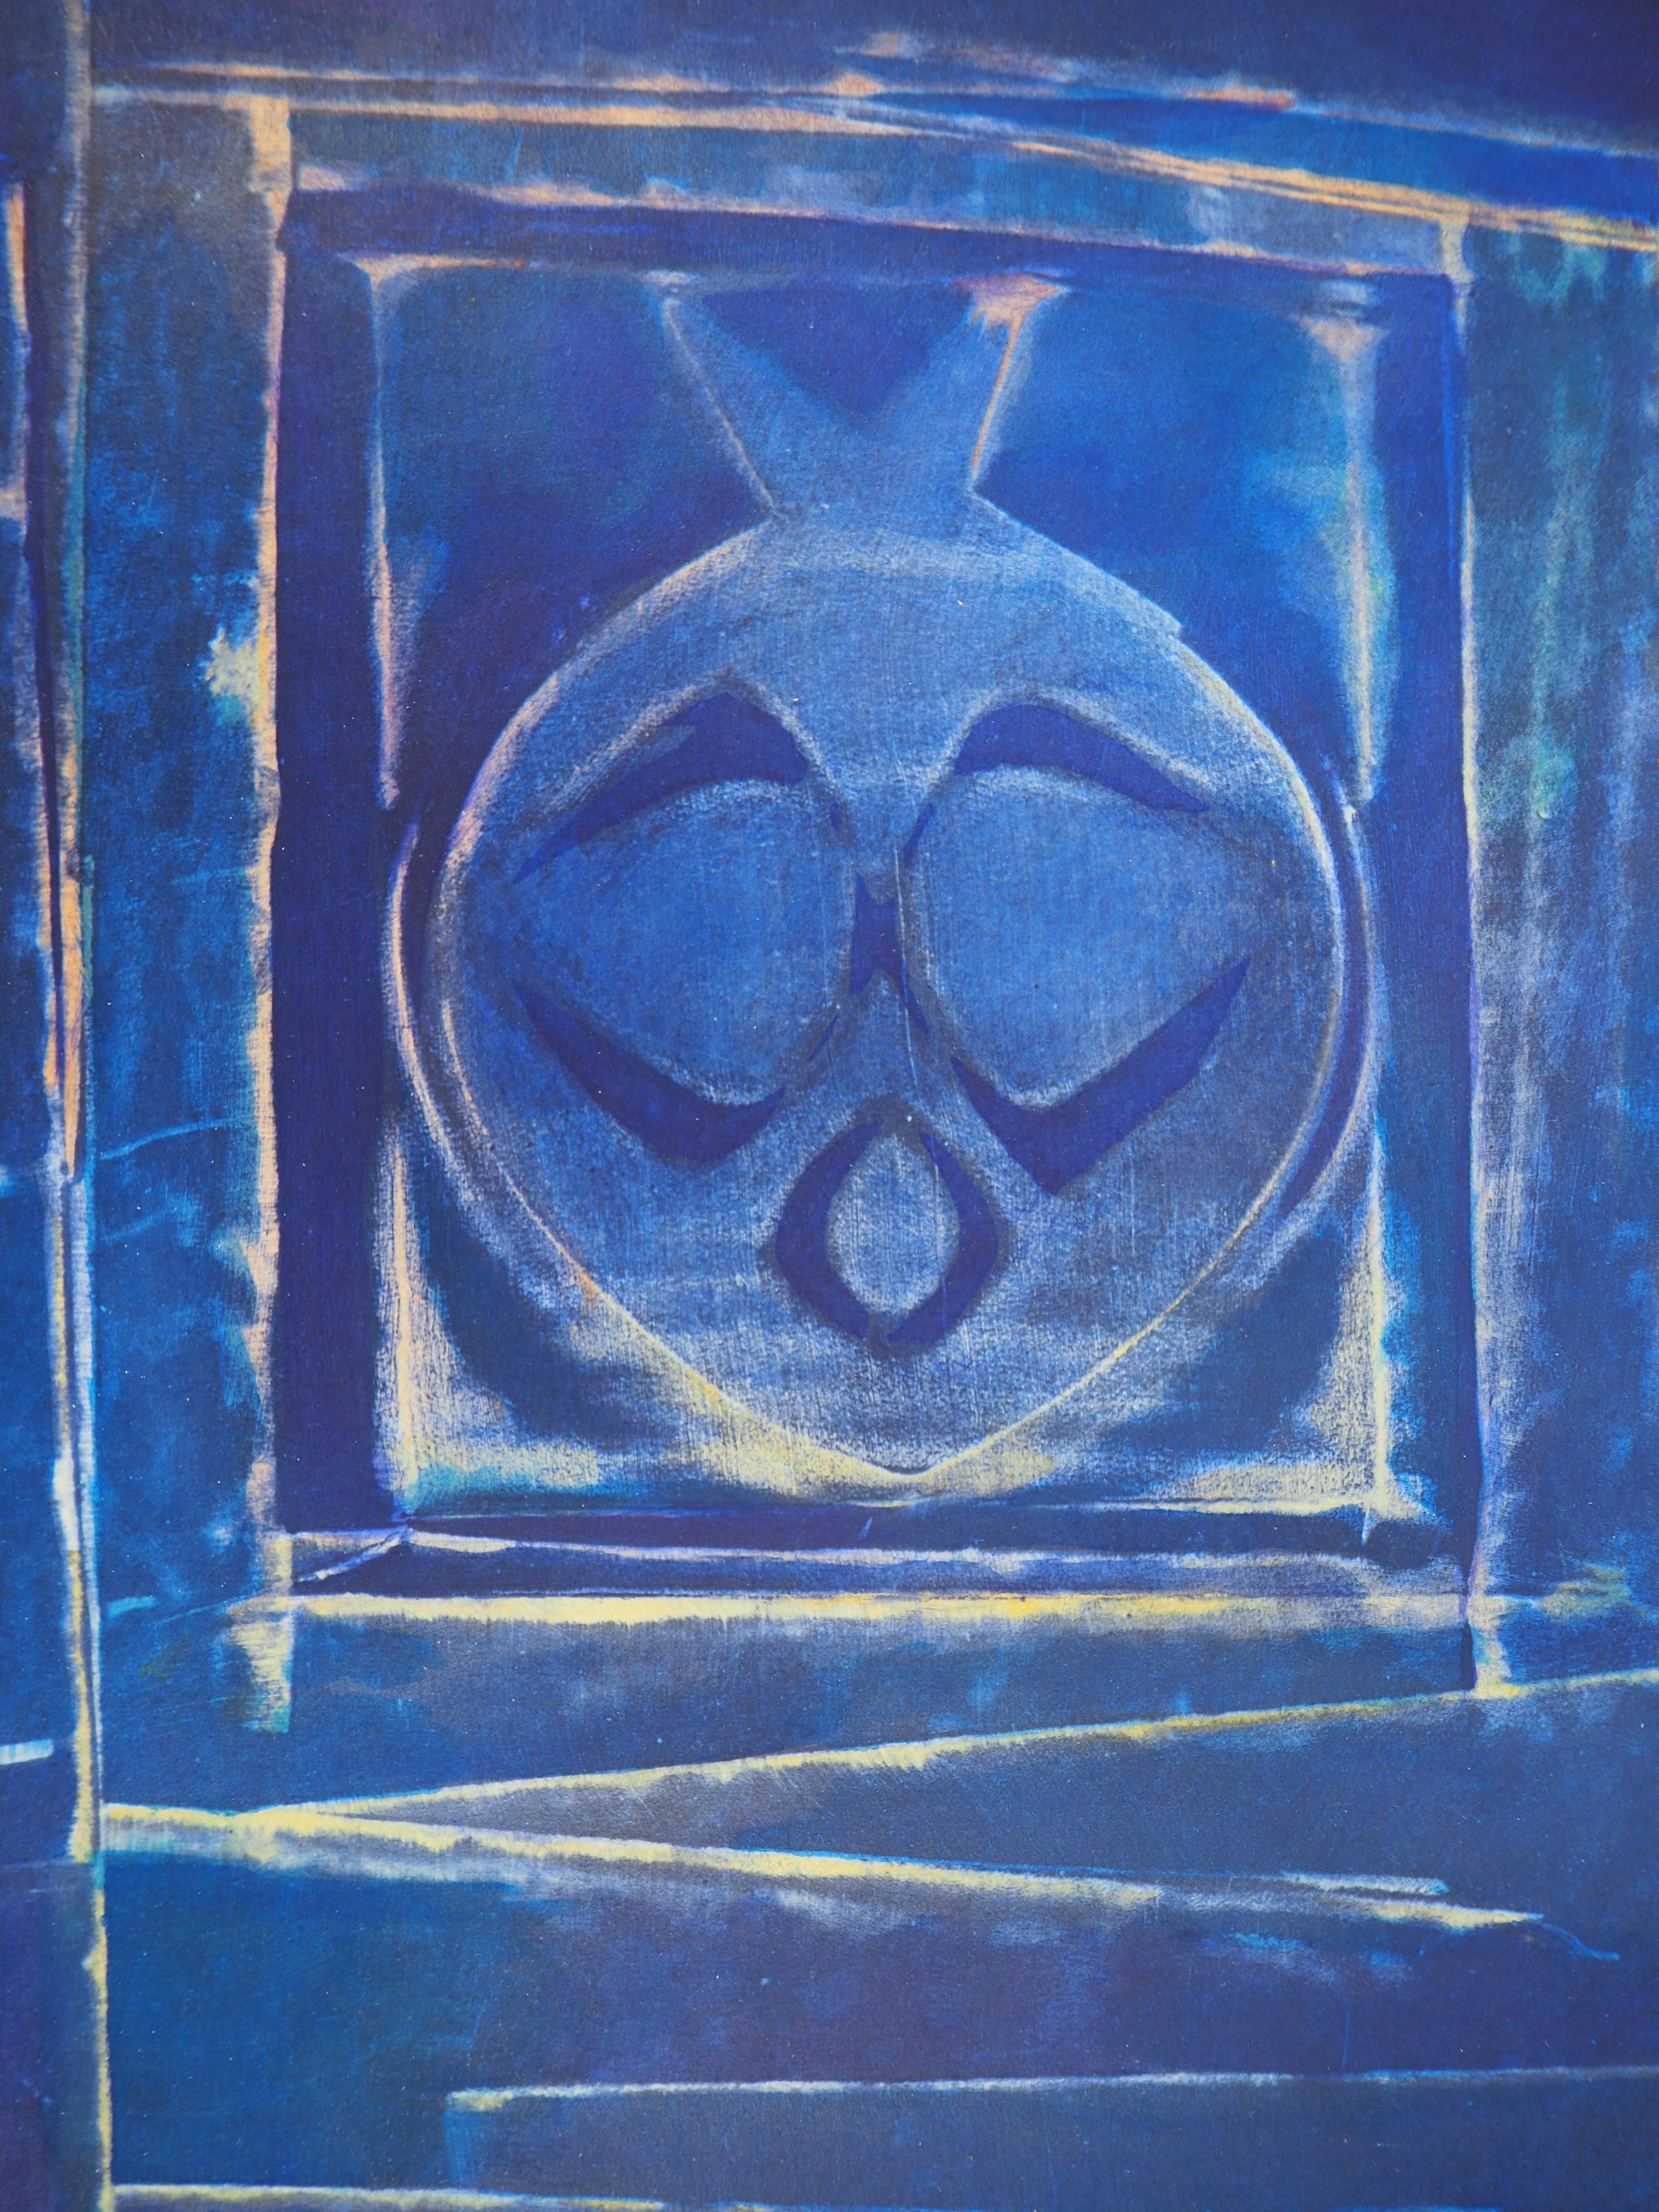 Composition with Blue Vase - Lithograph and stencil, 1958 - Print by Max Ernst